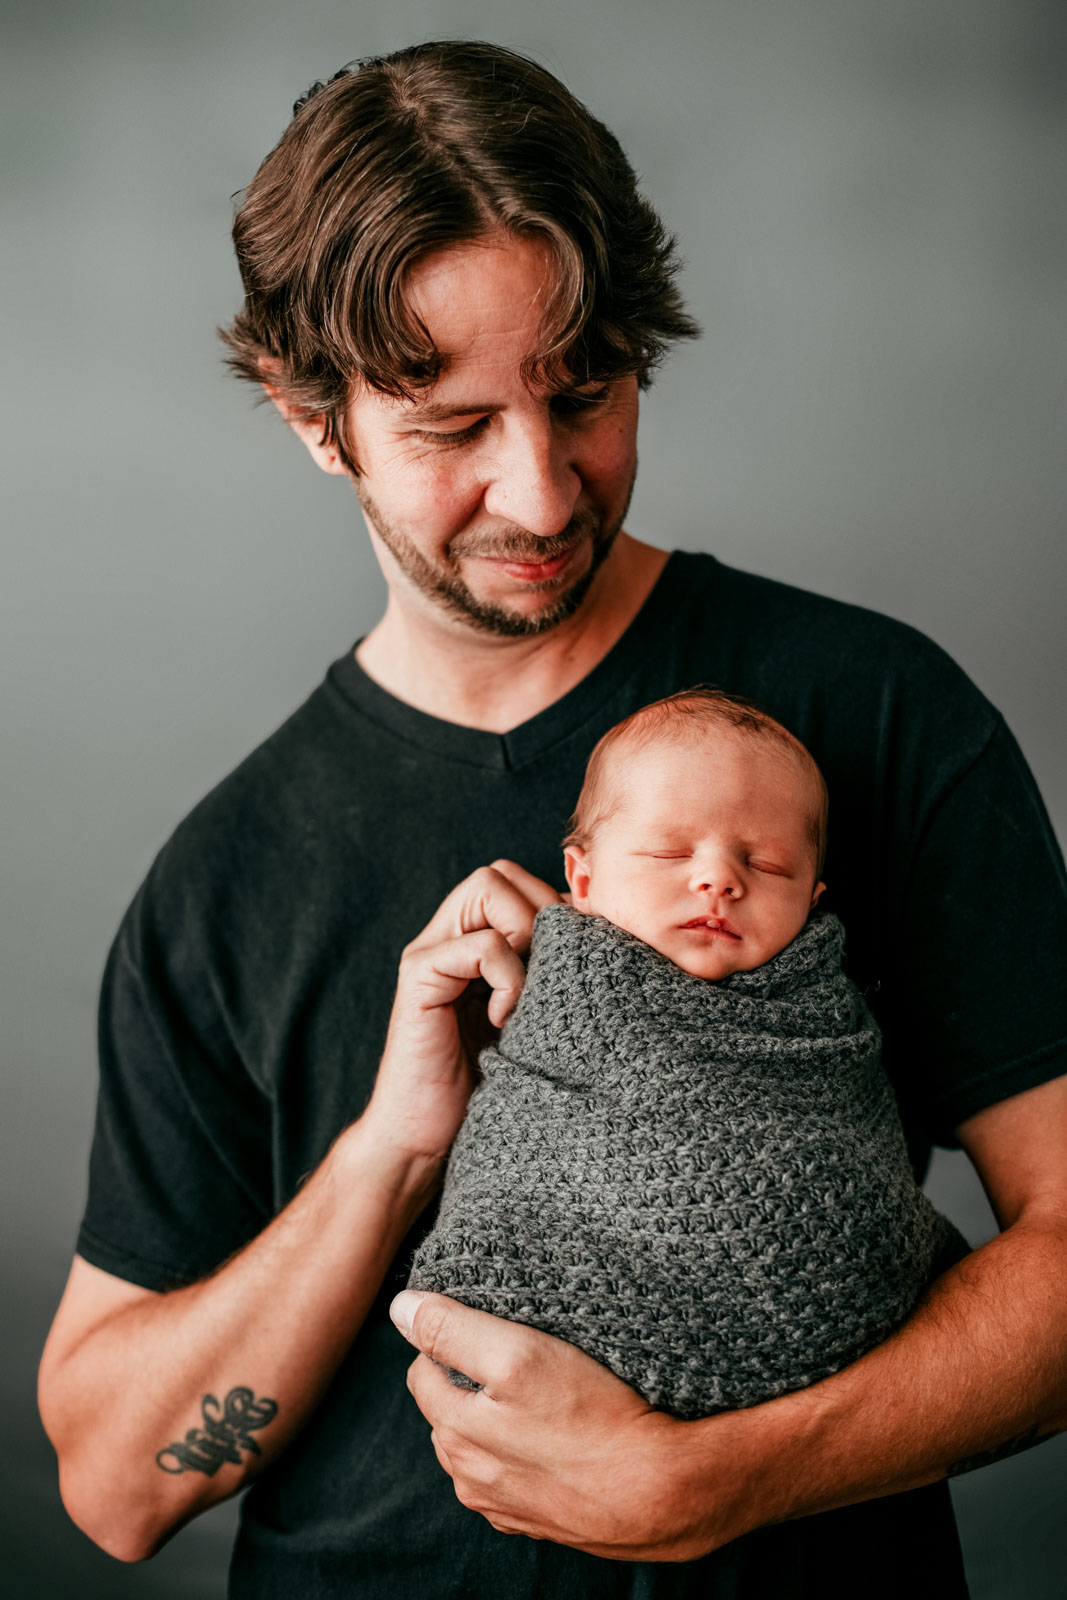 A father in a black shirt looks down on and holds his newborn child in a studio patch nashville